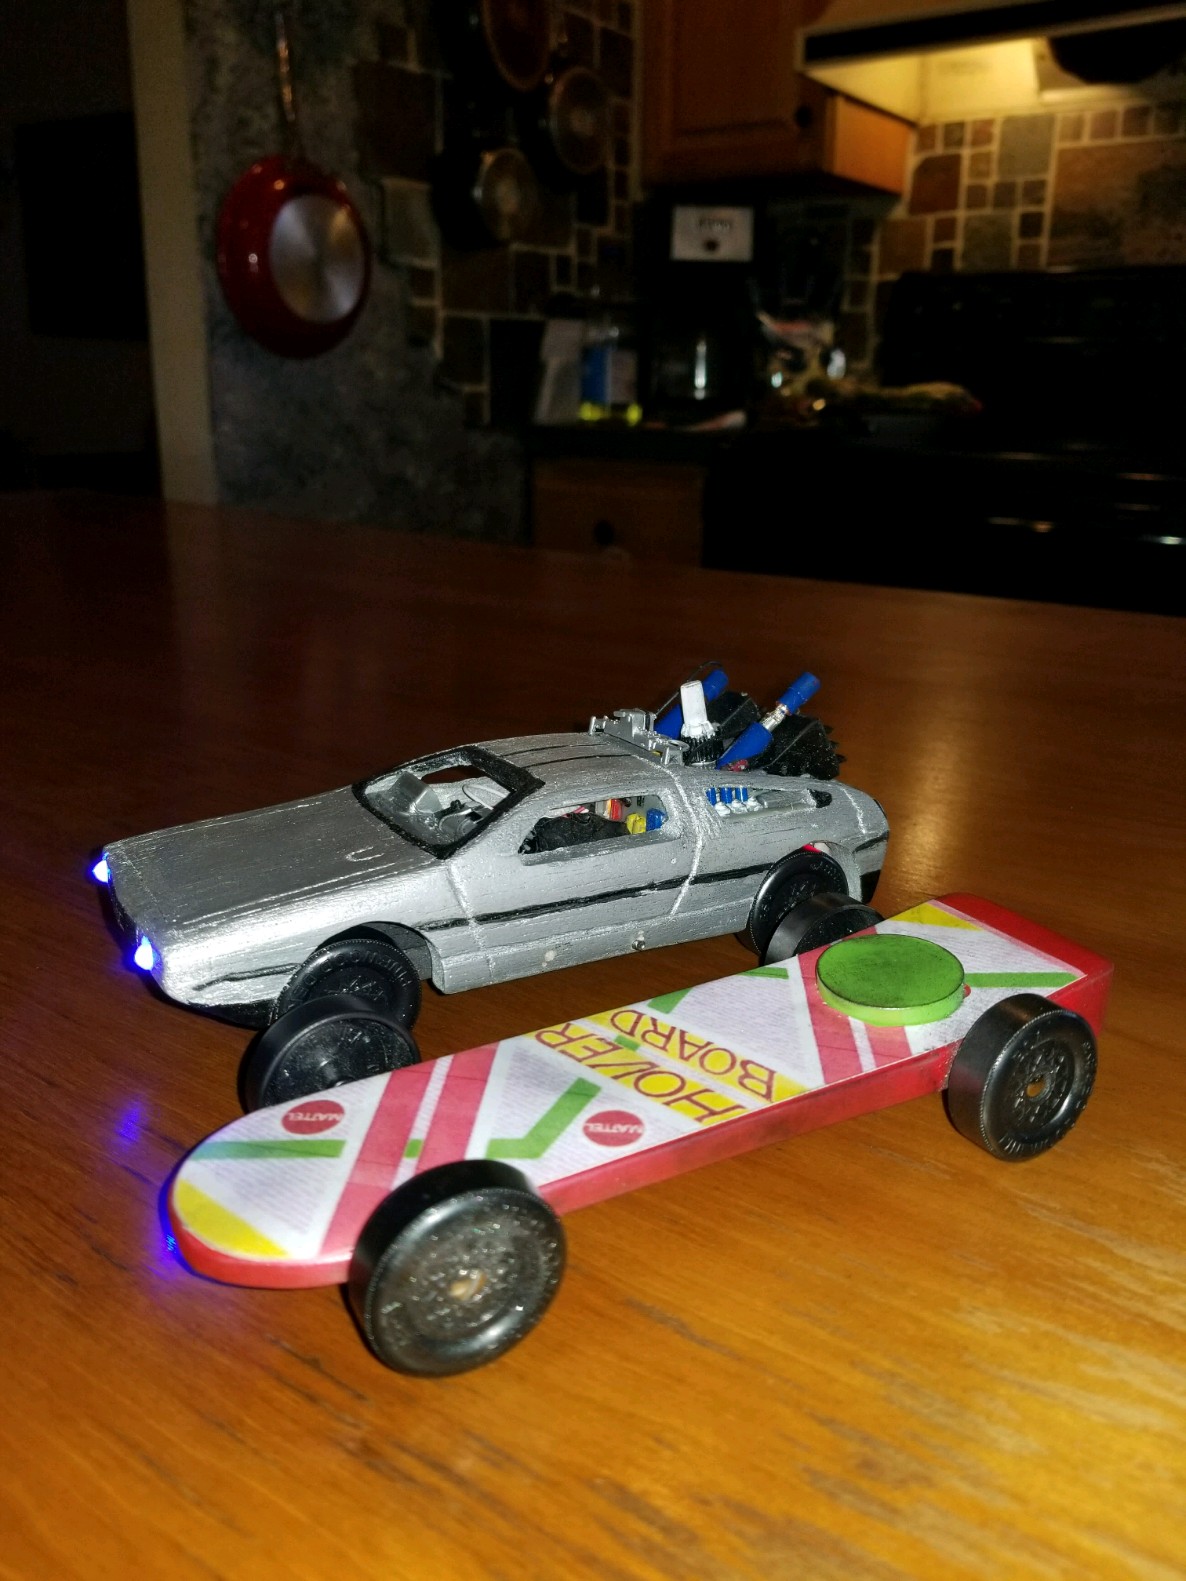 Hoverboard and Delorean from Back to the Future